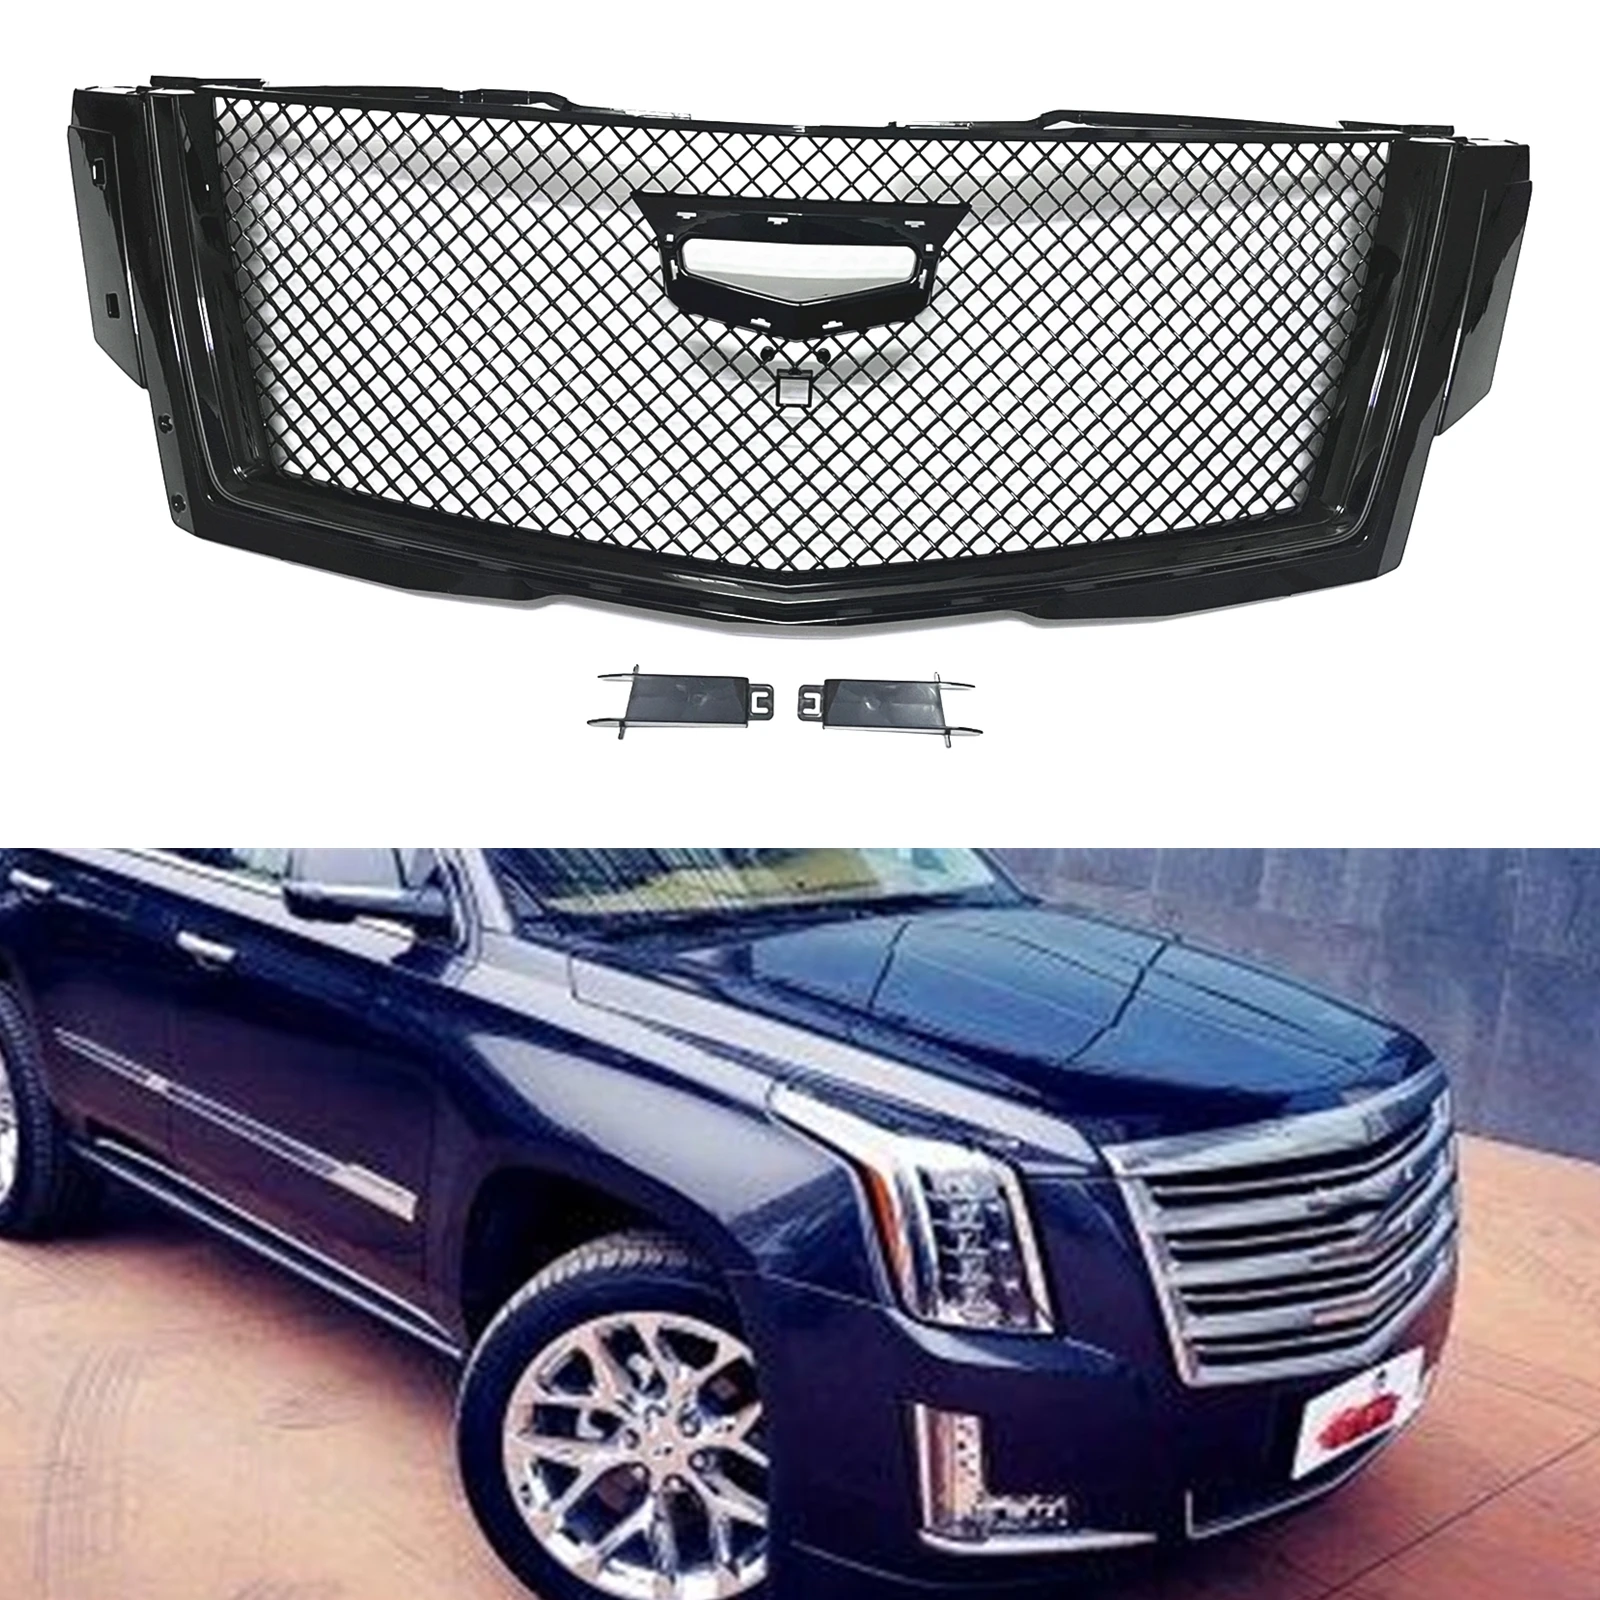 

Front Grille Grill For Cadillac Escalade 2015 2016 2017 2018 2019 2020 Honeycomb Style Black Car Upper Bumper Hood Mesh Grid Kit